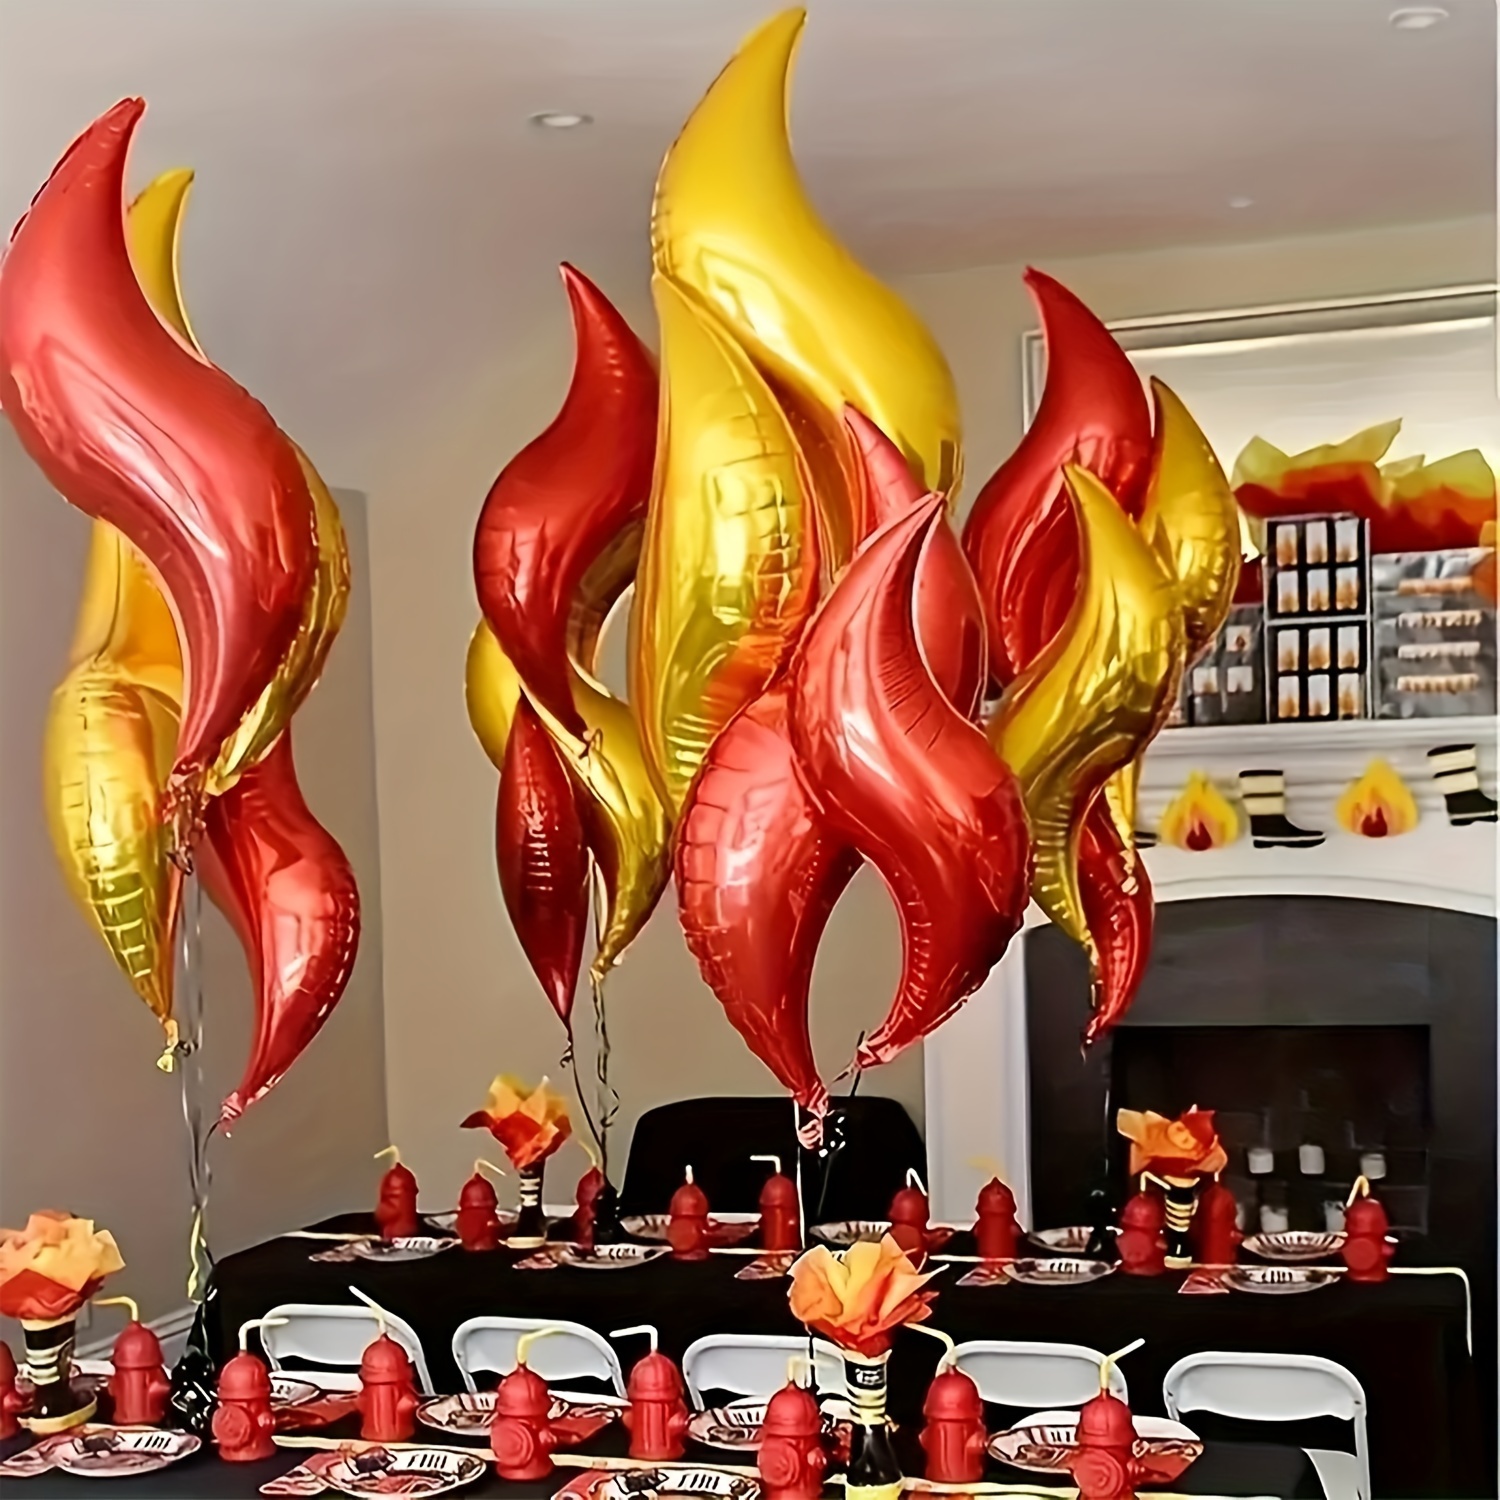 

20-piece Metallic & Red Flame Foil Balloons Set - Perfect For Fire Brigade Themed Celebrations, Birthdays, Carnivals & Interior Design